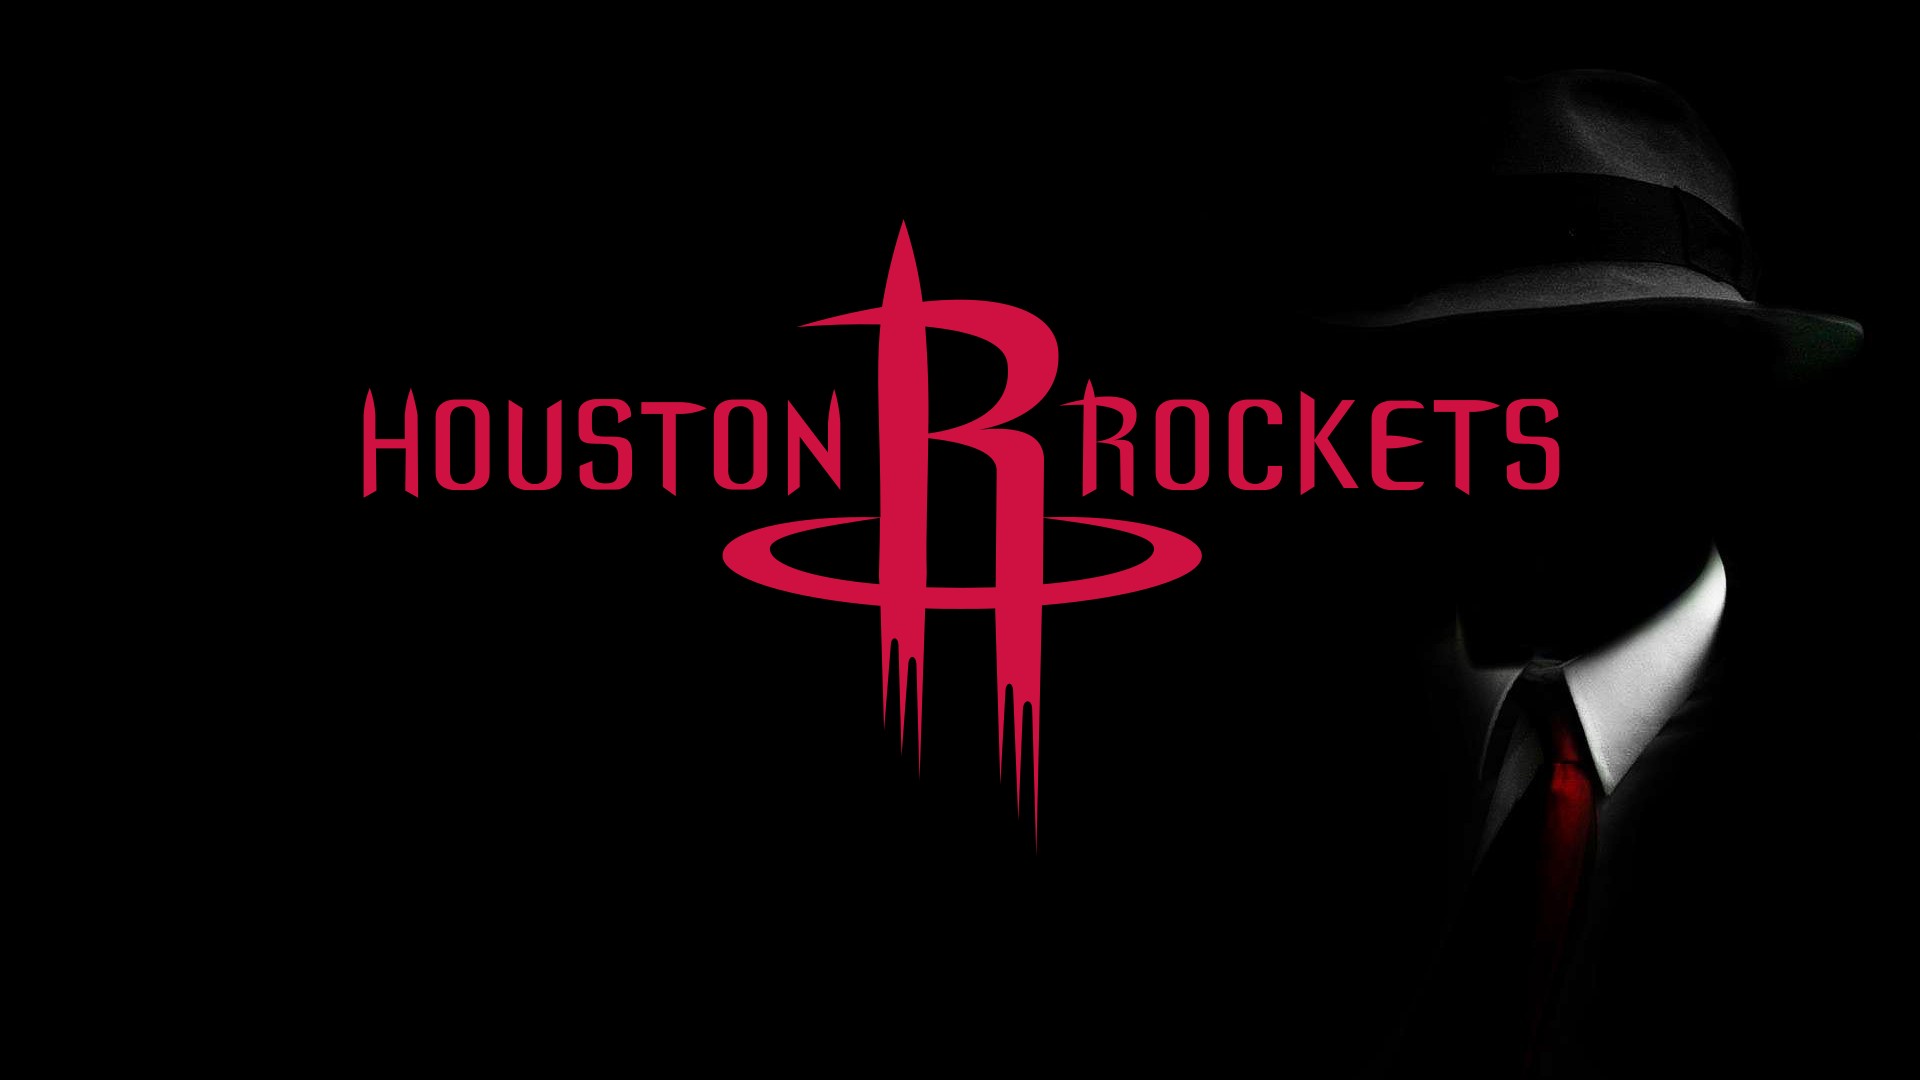 HD Houston Basketball Backgrounds with image dimensions 1920x1080 pixel. You can make this wallpaper for your Desktop Computer Backgrounds, Windows or Mac Screensavers, iPhone Lock screen, Tablet or Android and another Mobile Phone device